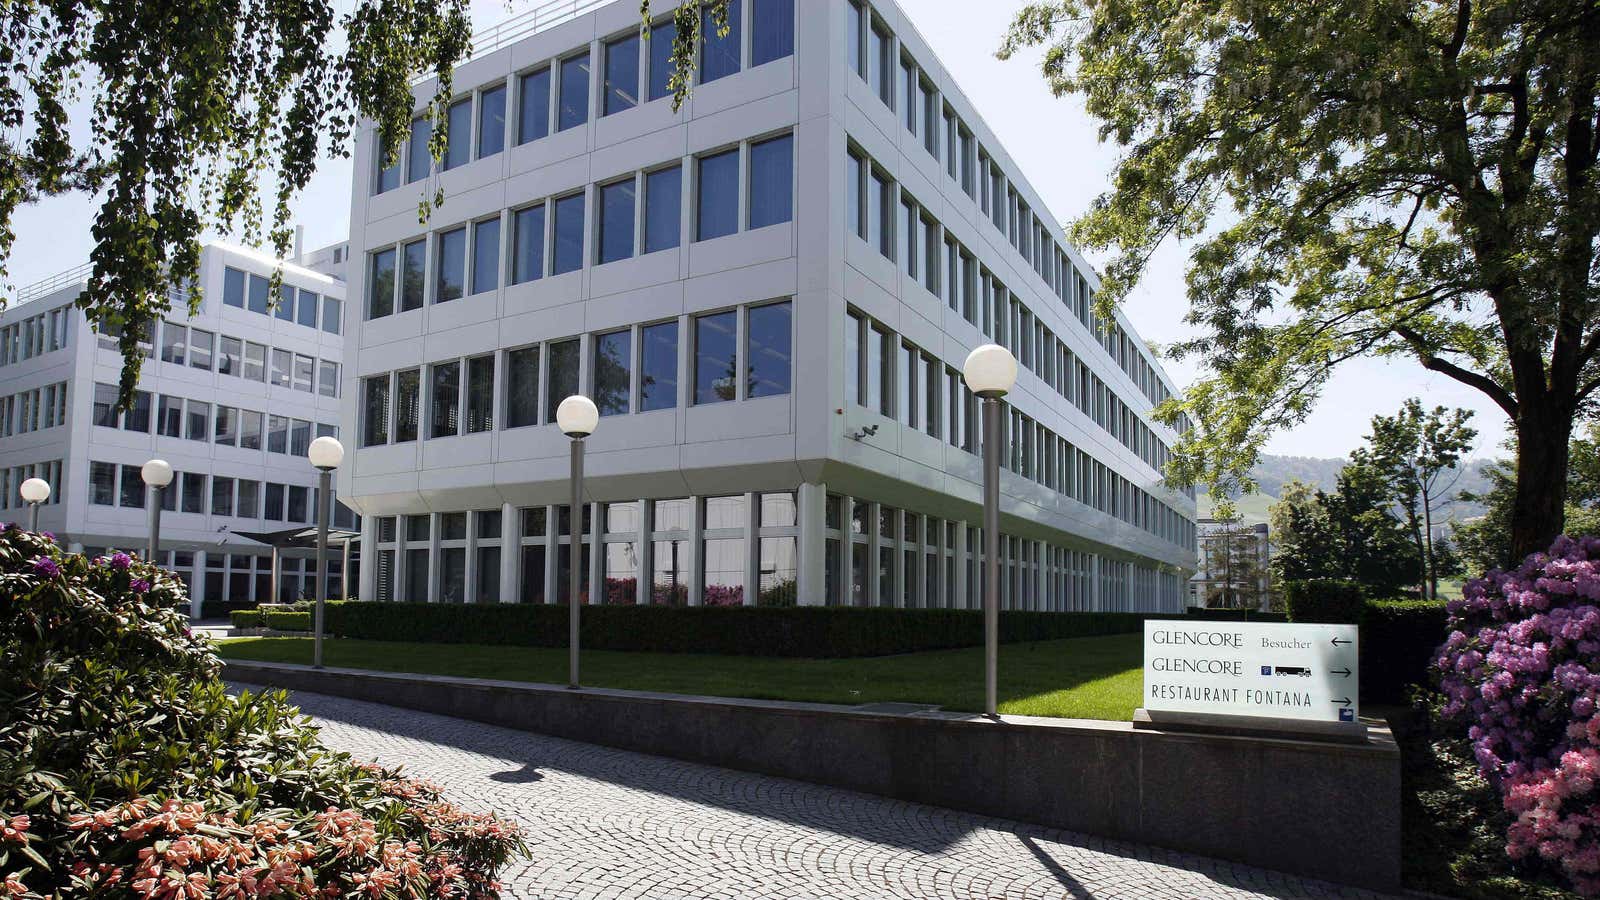 The unassuming headquarters of Glencore, which was always an intensively private company, are tucked away in the tiny village of Baar in the Swiss canton of Zug.